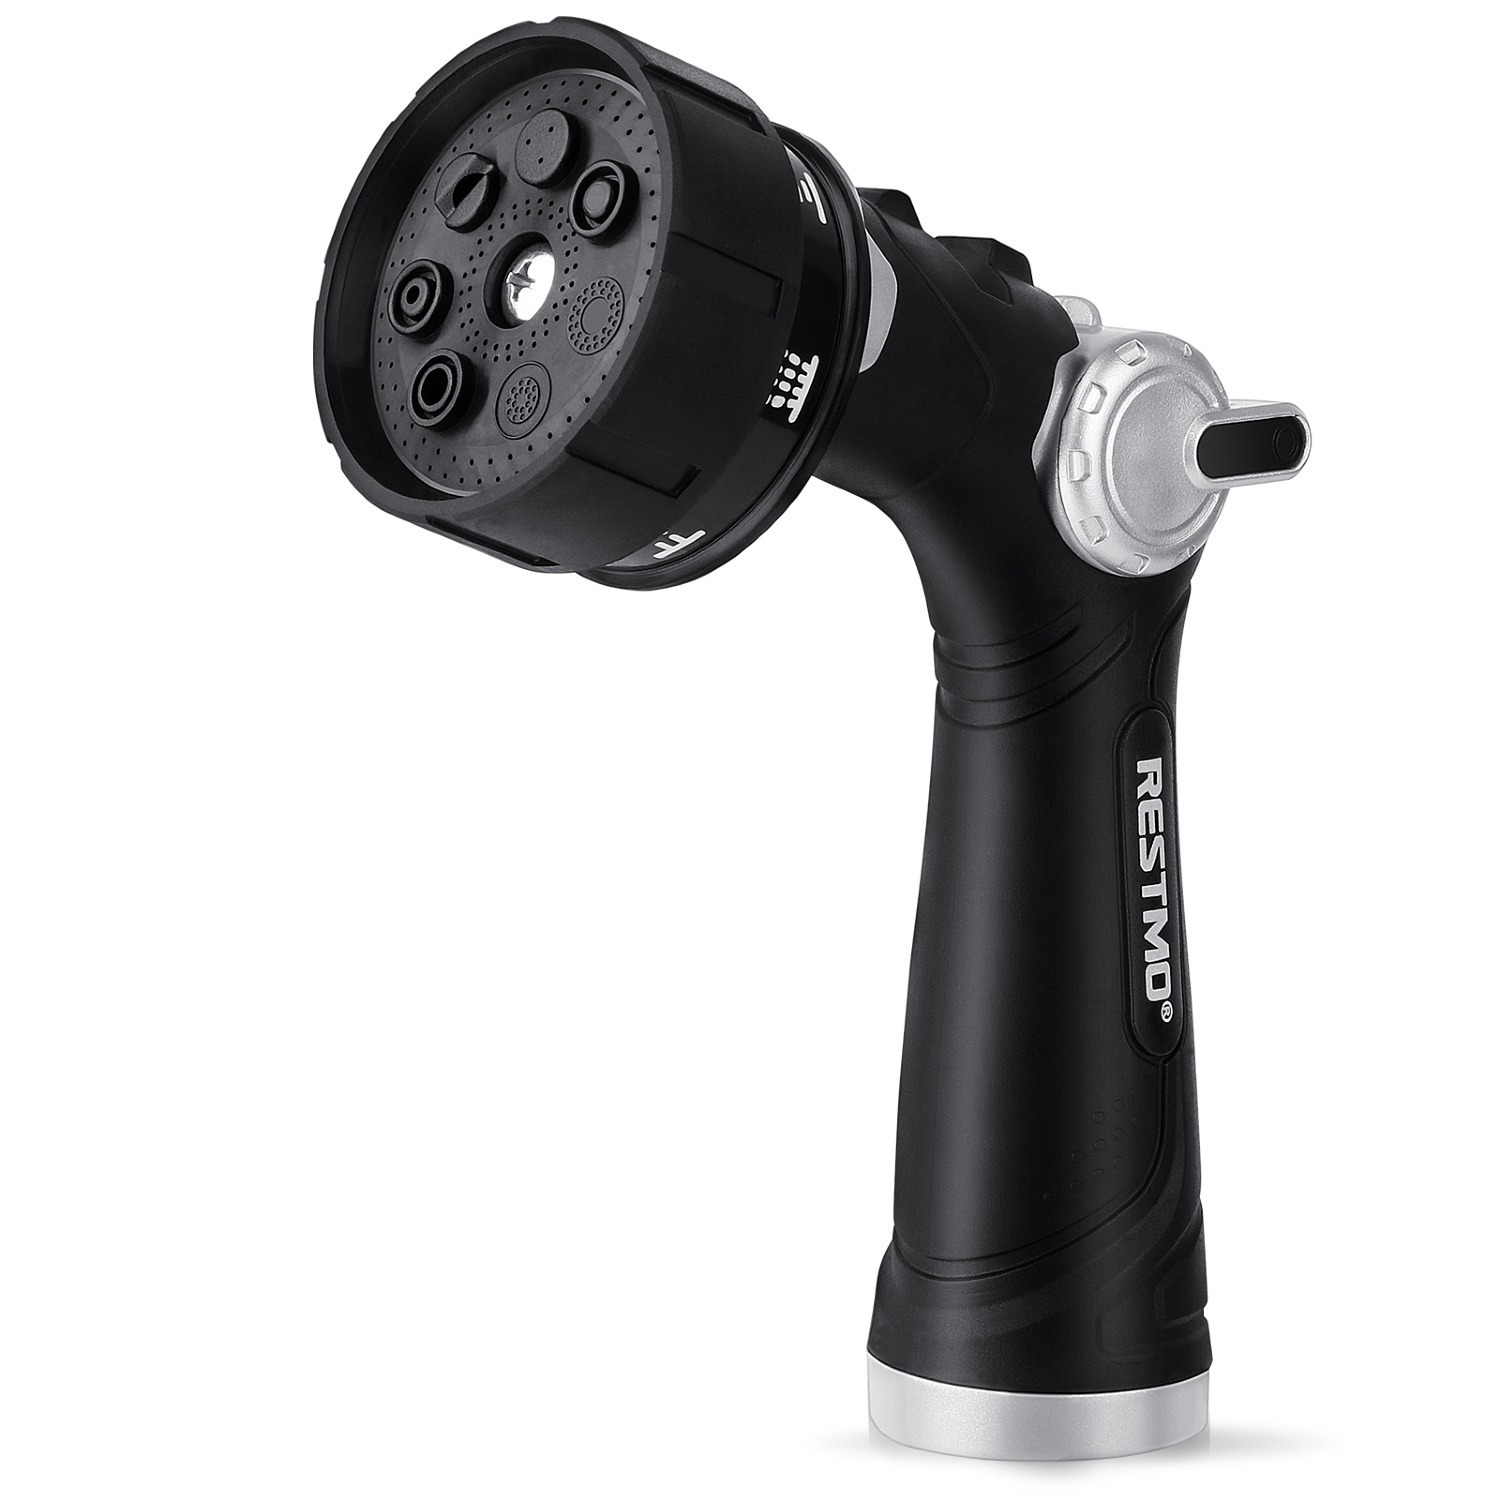 RESTMO Heavy Duty Metal Hose Nozzle w/ 6 Spray Pattern $5 + Free Shipping w/ Prime or orders $35+